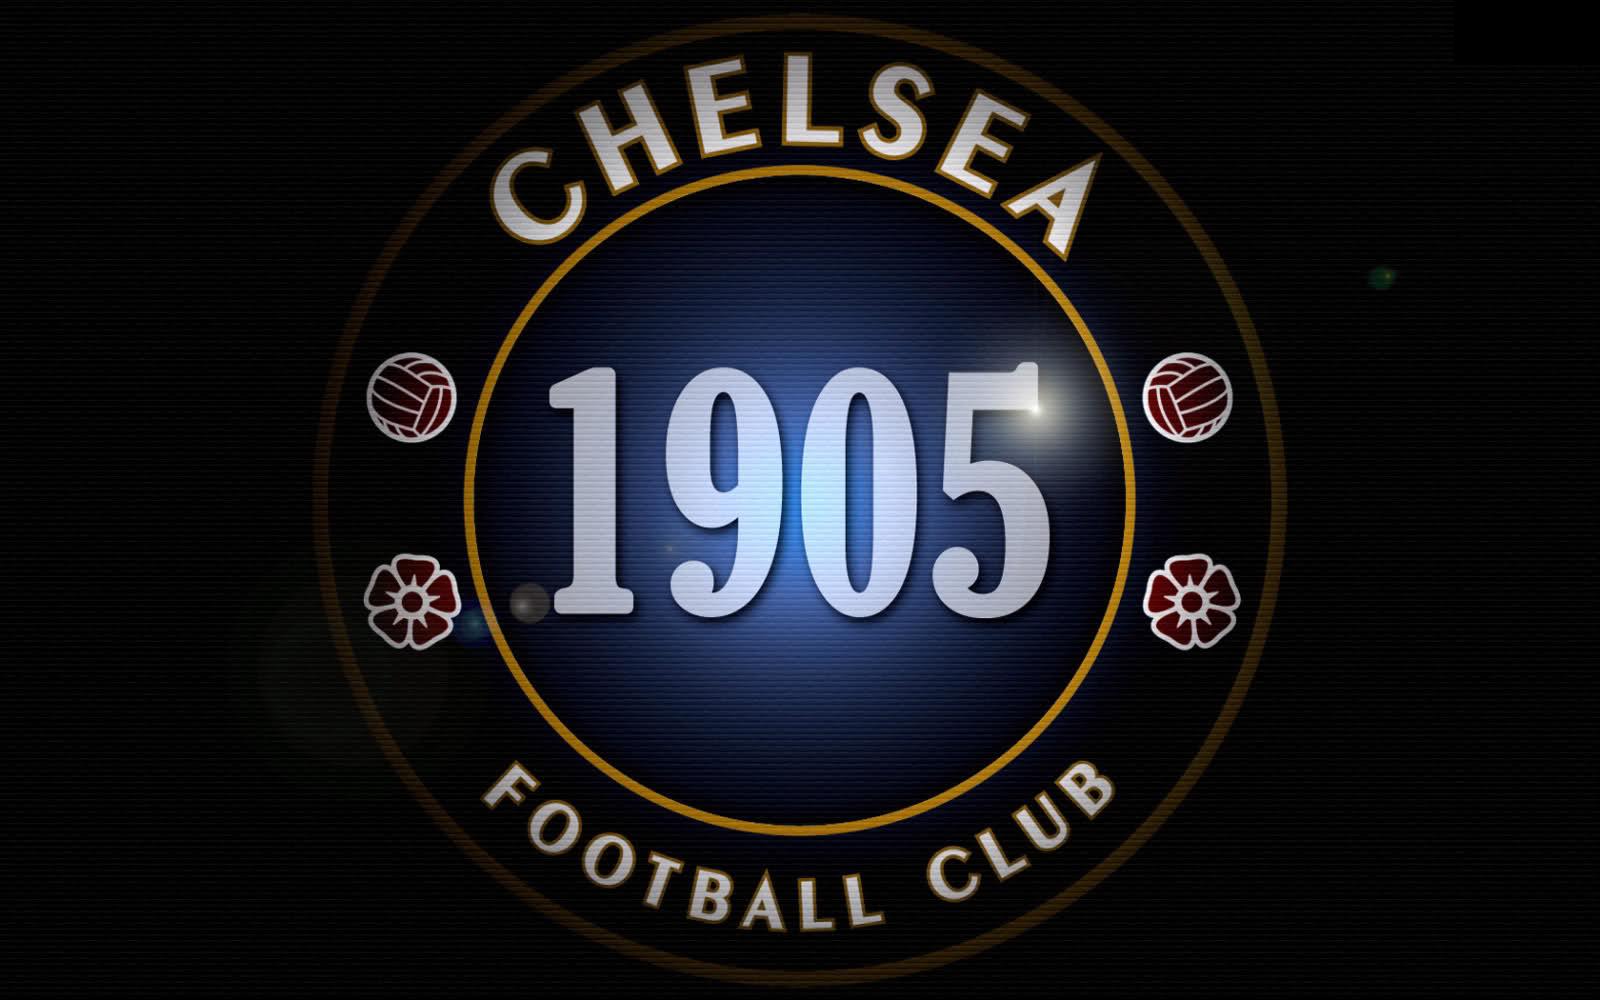 ... on some iphone wallpaper widescreen chelsea wallpaper downloadshere is